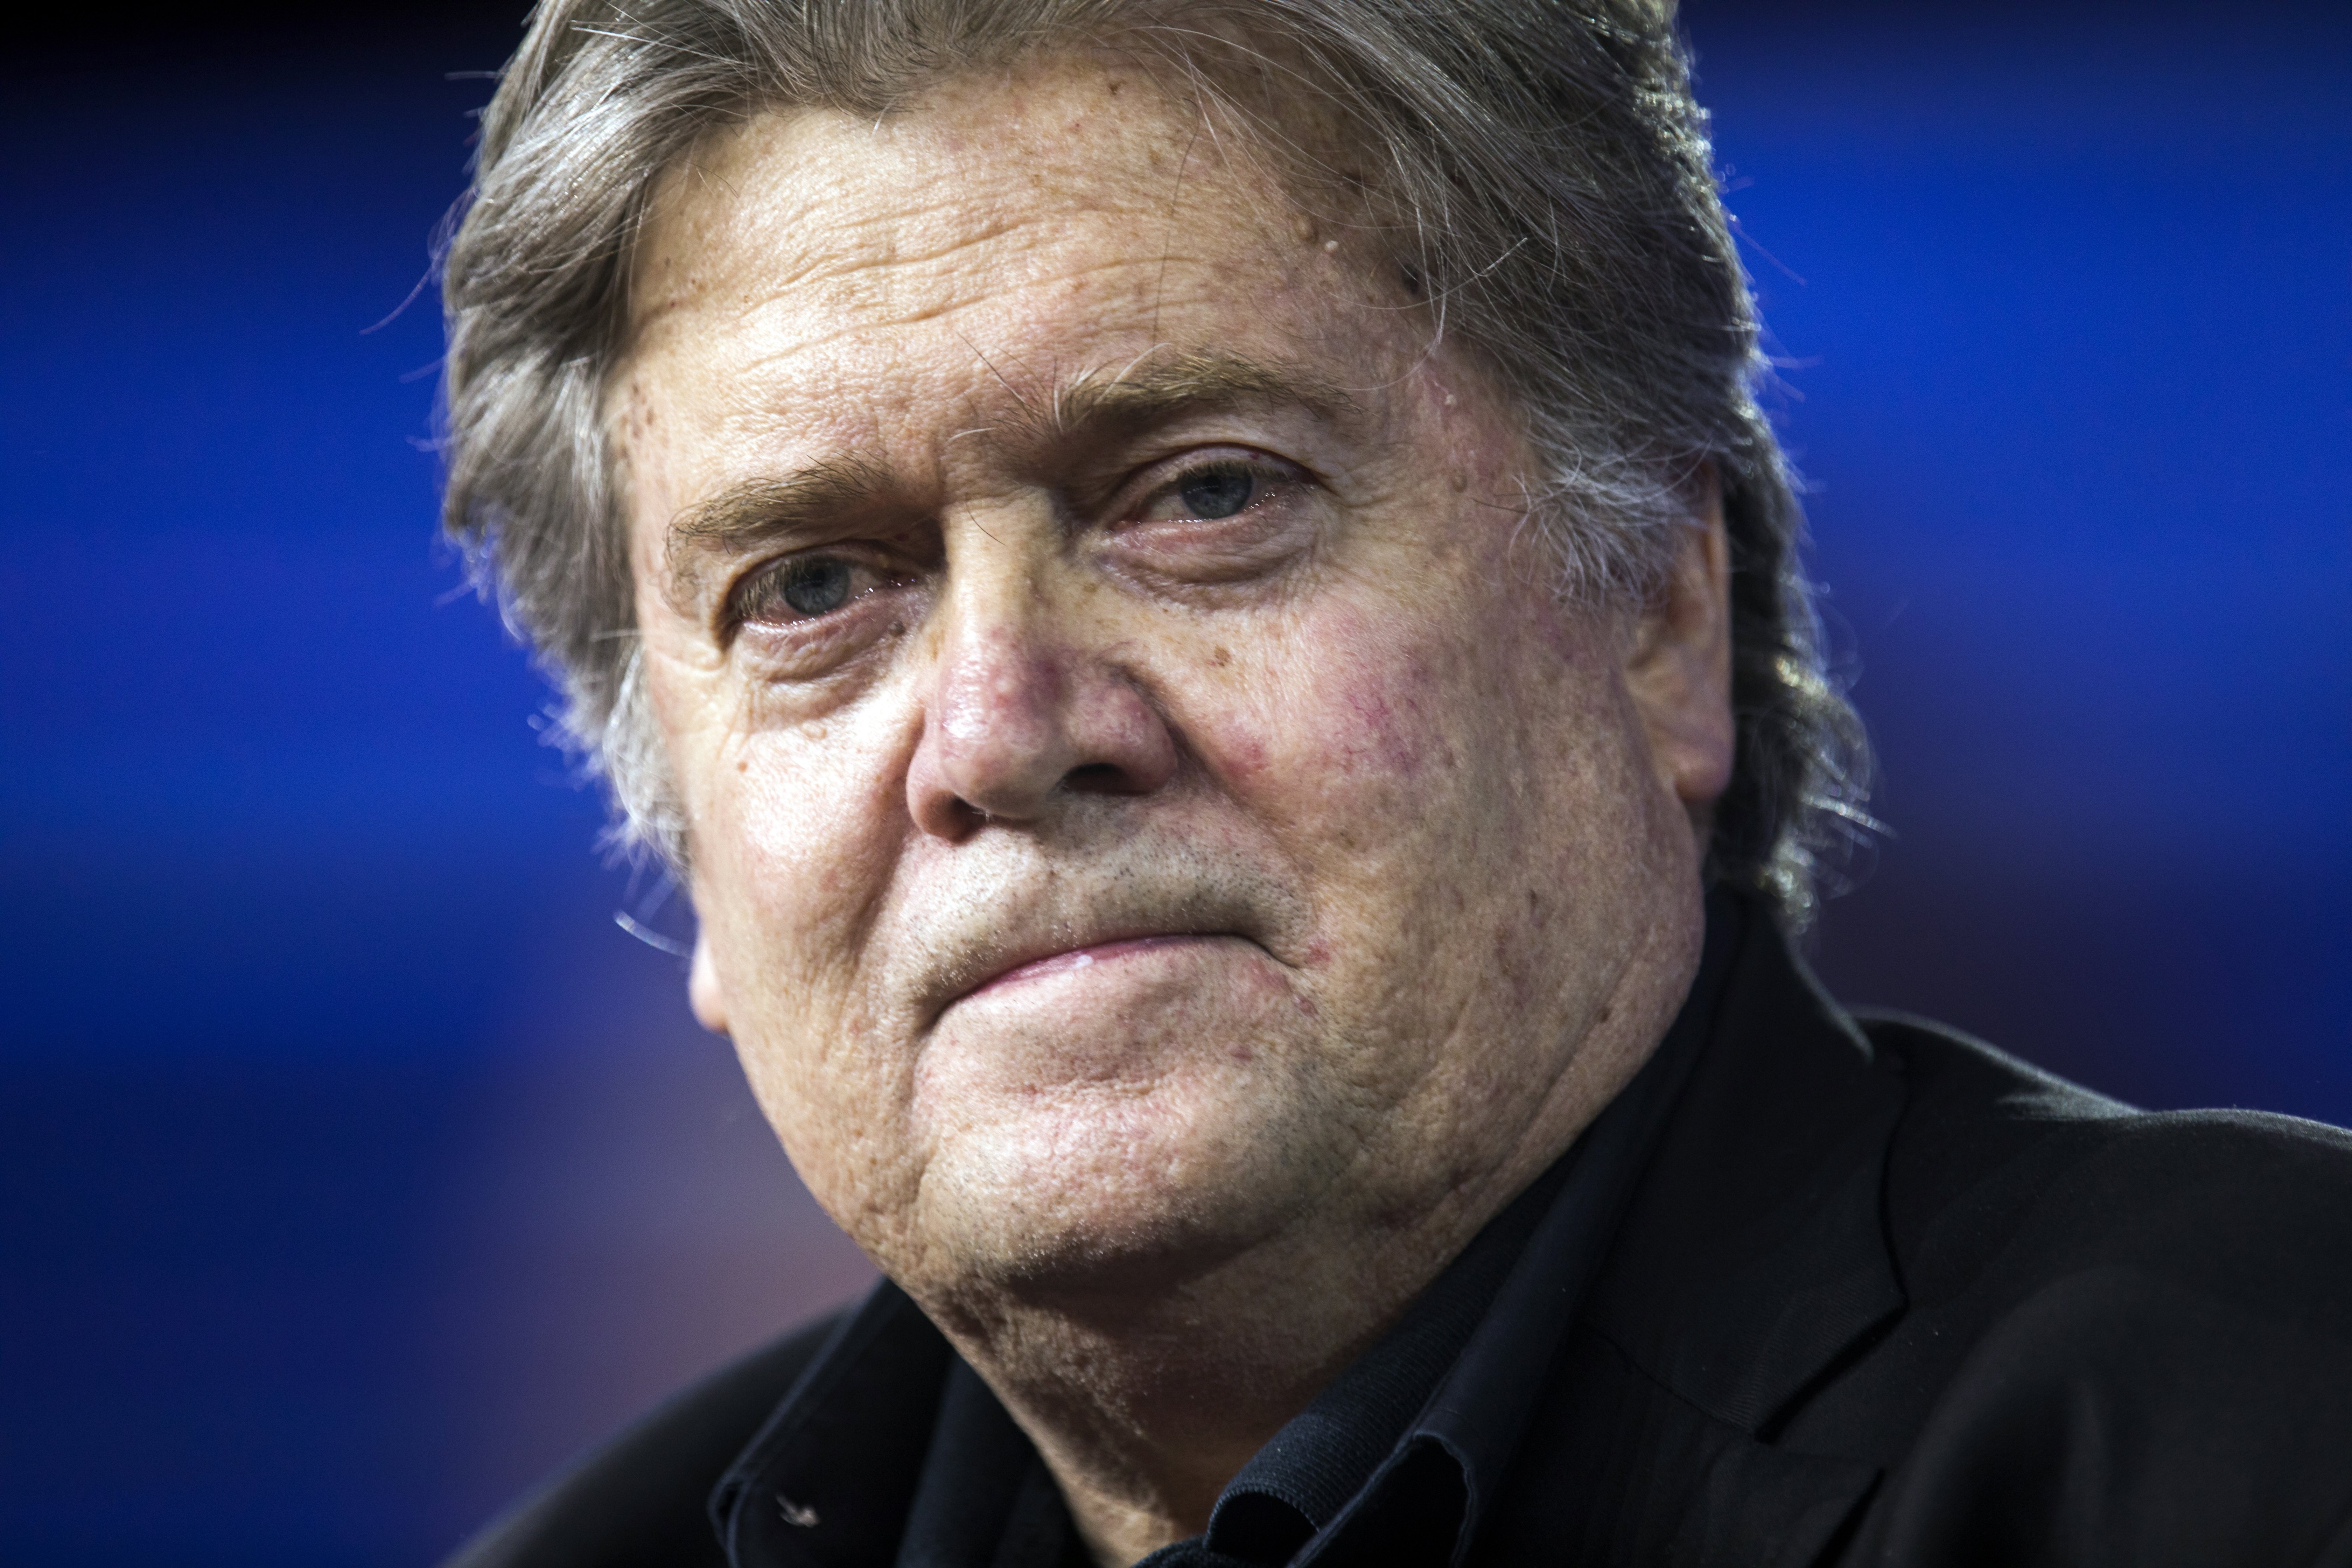 Steve Bannon, when still White House Chief Strategist, speaks at the 44th Annual Conservative Political Action Conference (CPAC) at the Gaylord National Resort & Convention Center in National Harbor, Maryland, USA, Feb. 23, 2017.